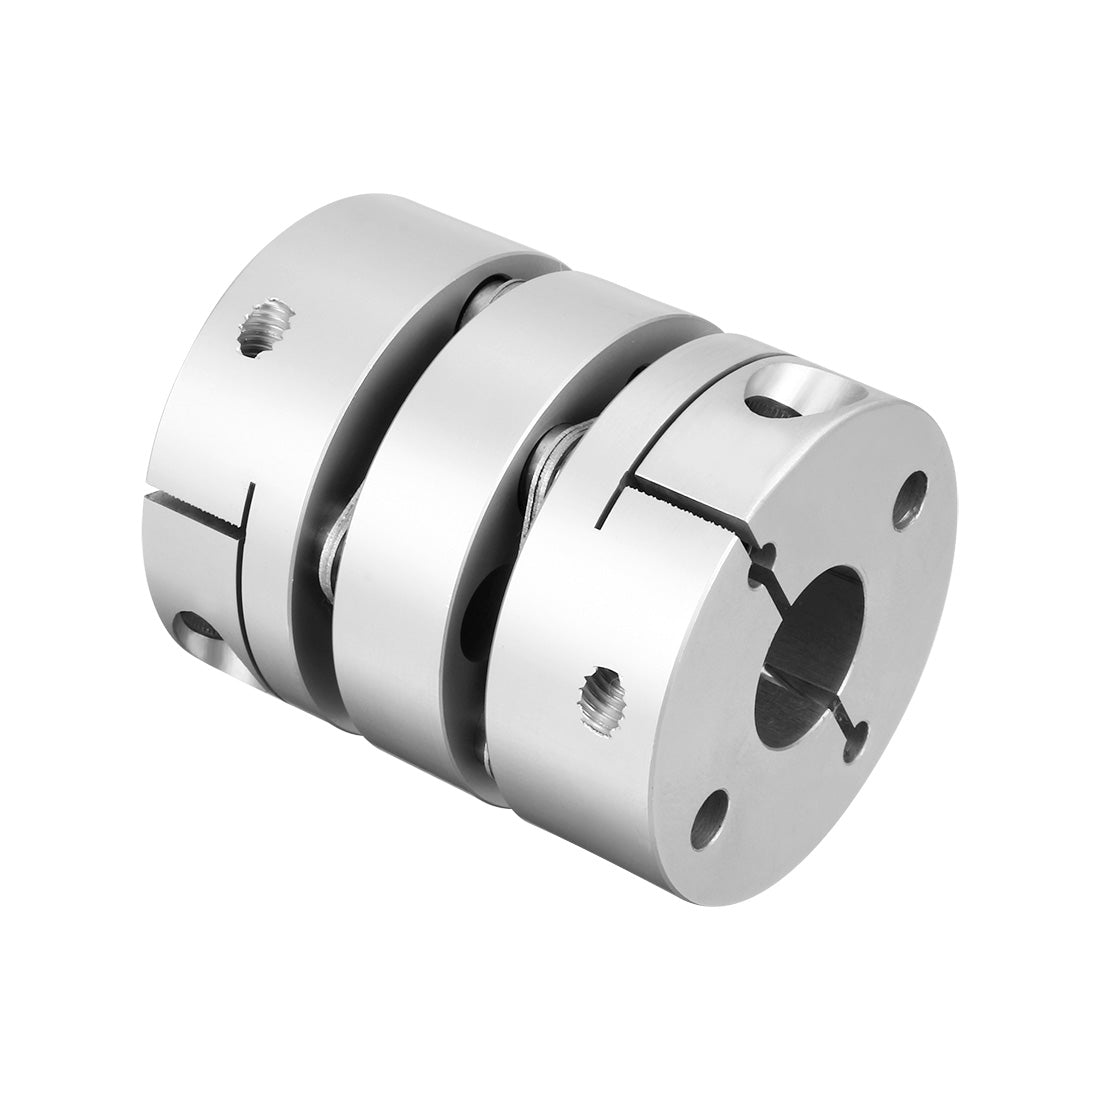 uxcell Uxcell 14mmx14mm Clamp Tight Motor Shaft 2 Diaphragm Coupling accoupler